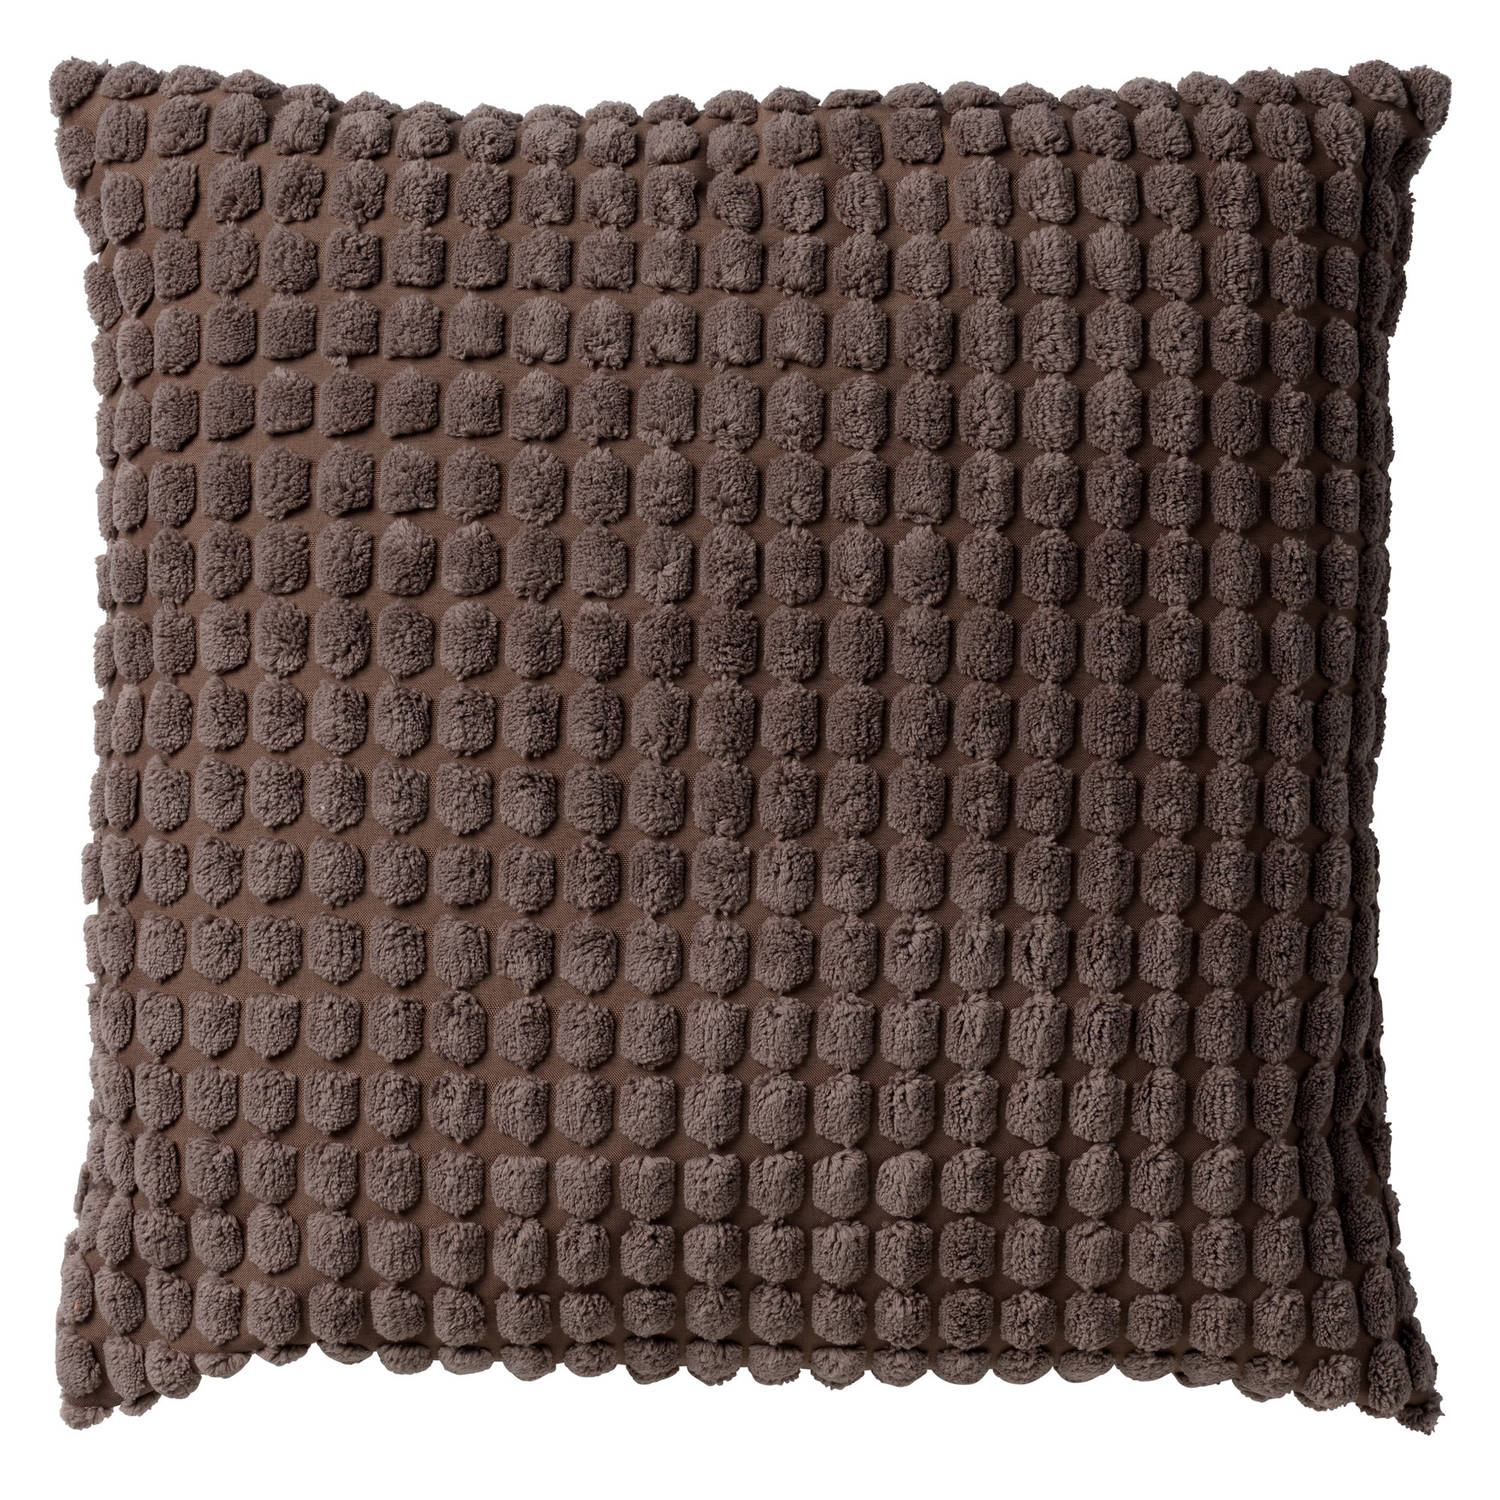 Kussenhoes Rome 45x45 cm taupe